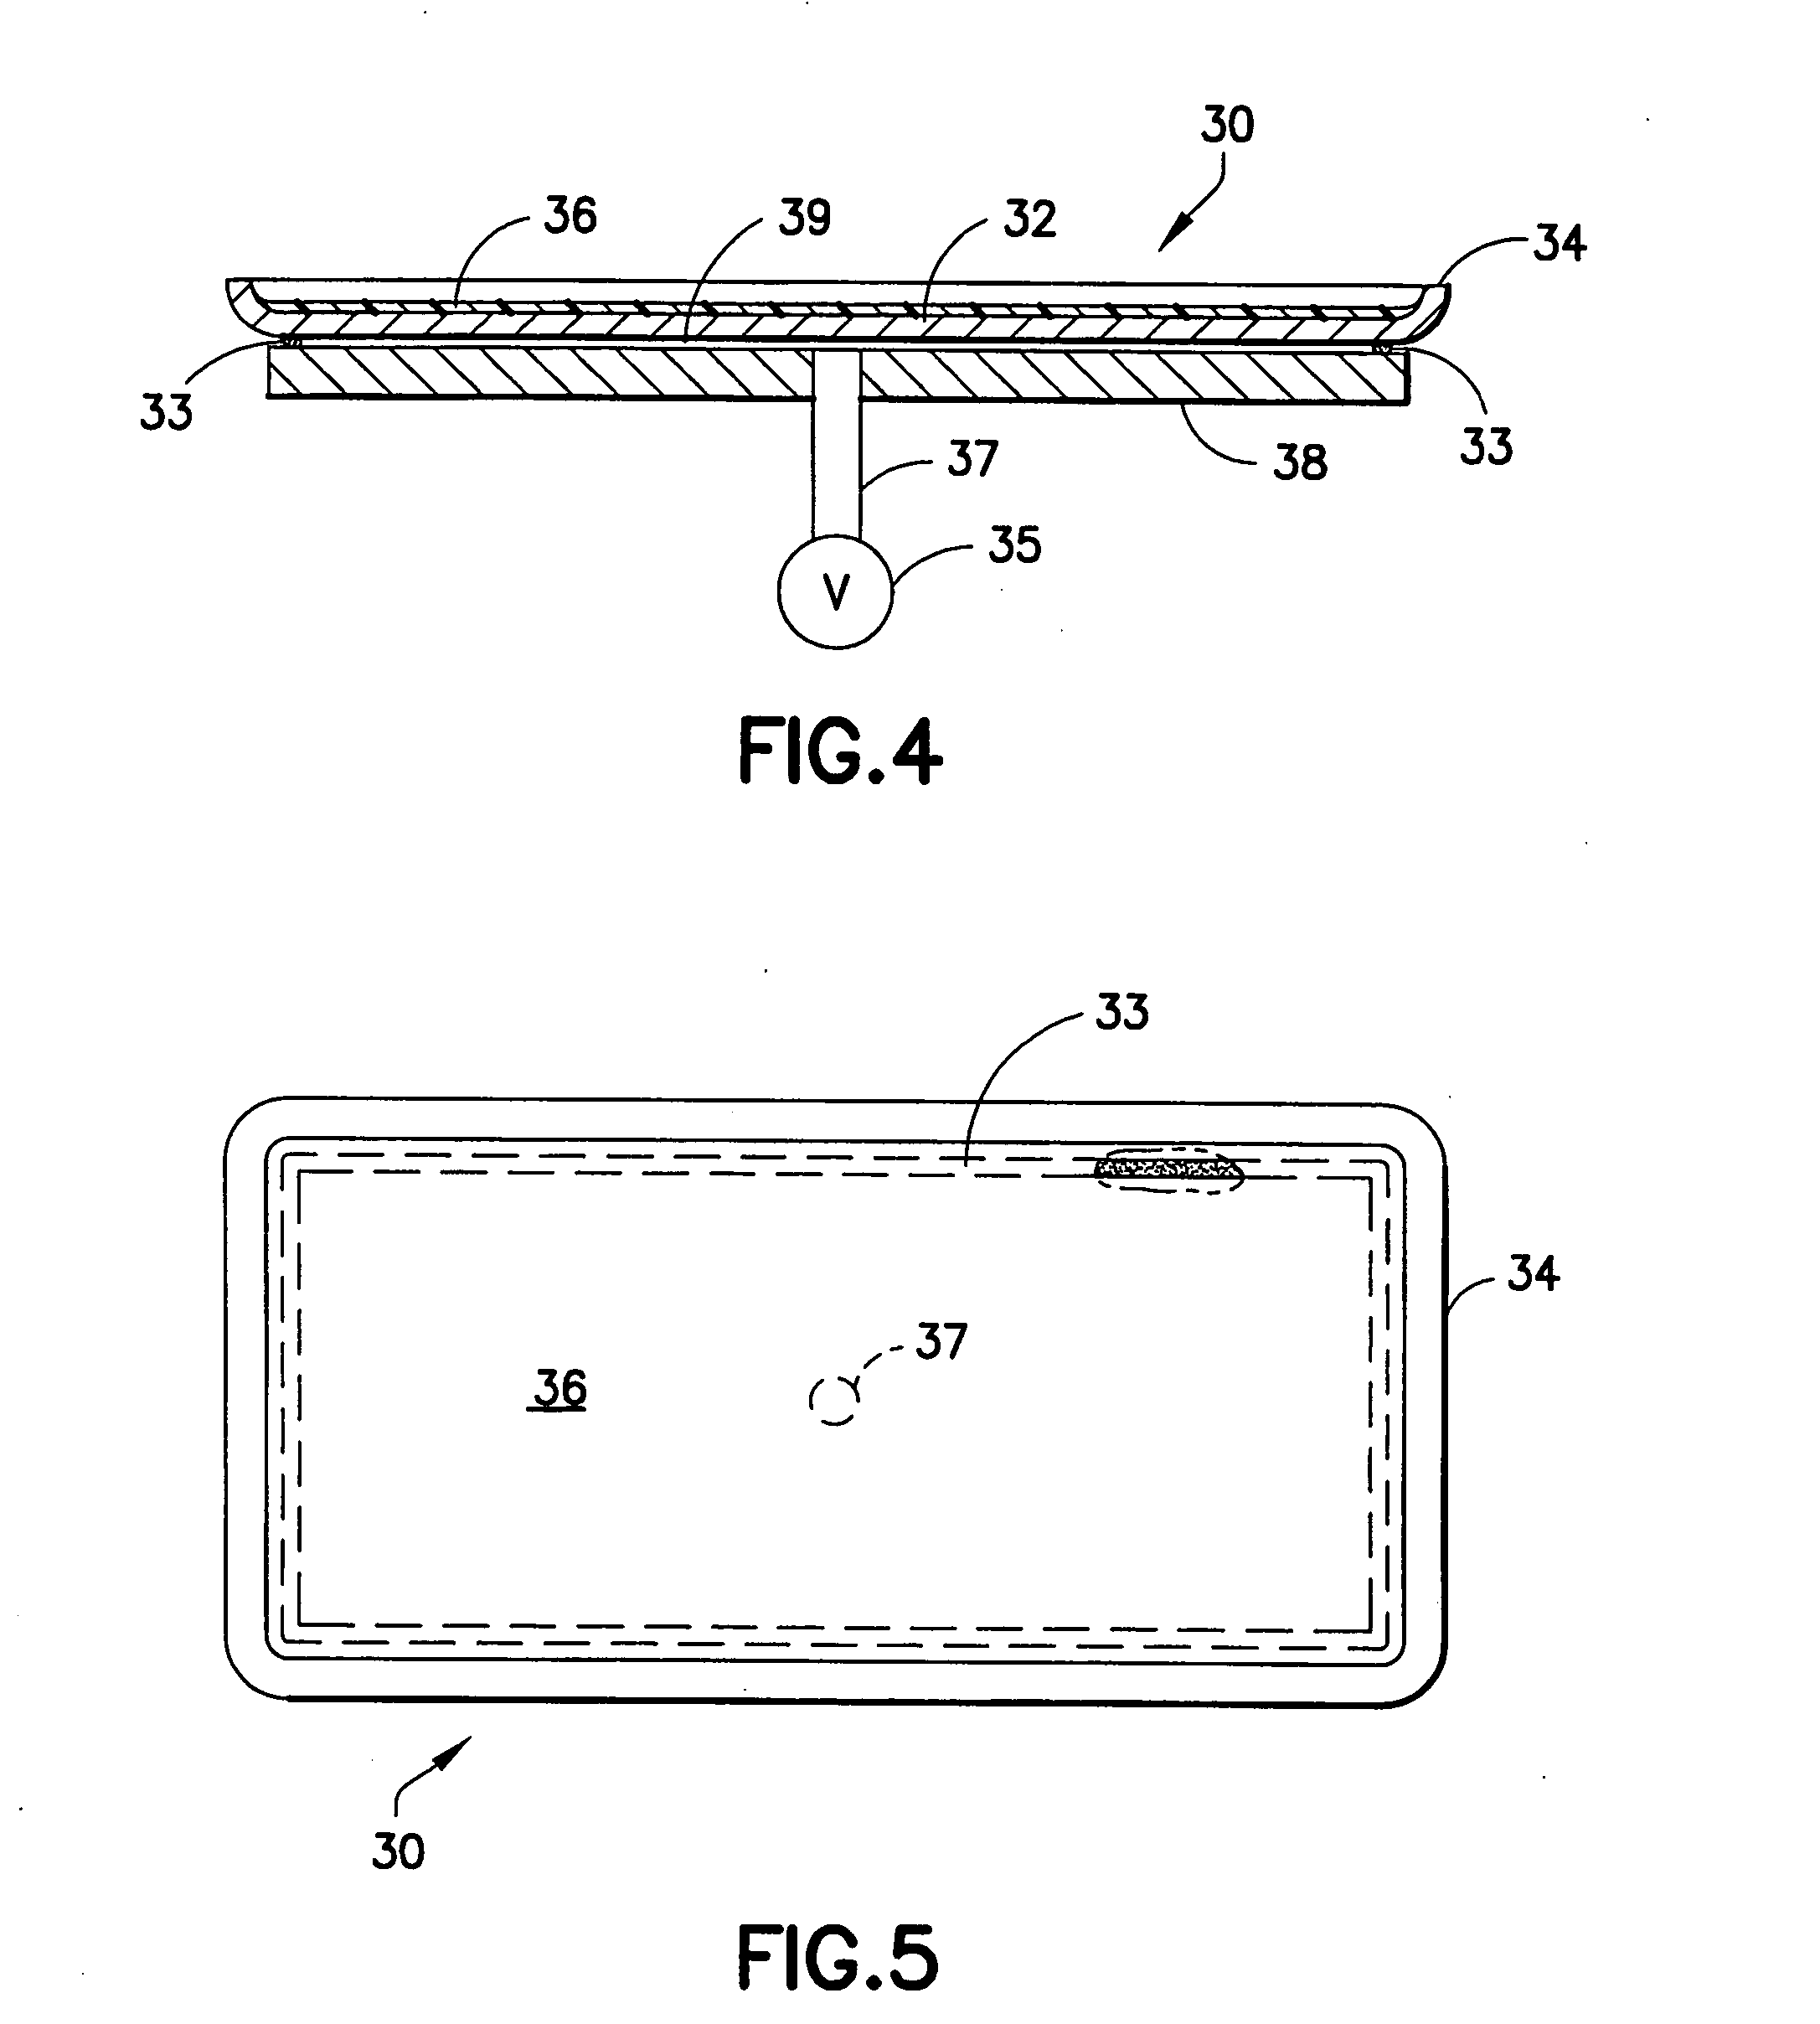 Griddle plate having a vacuum bonded cook surface